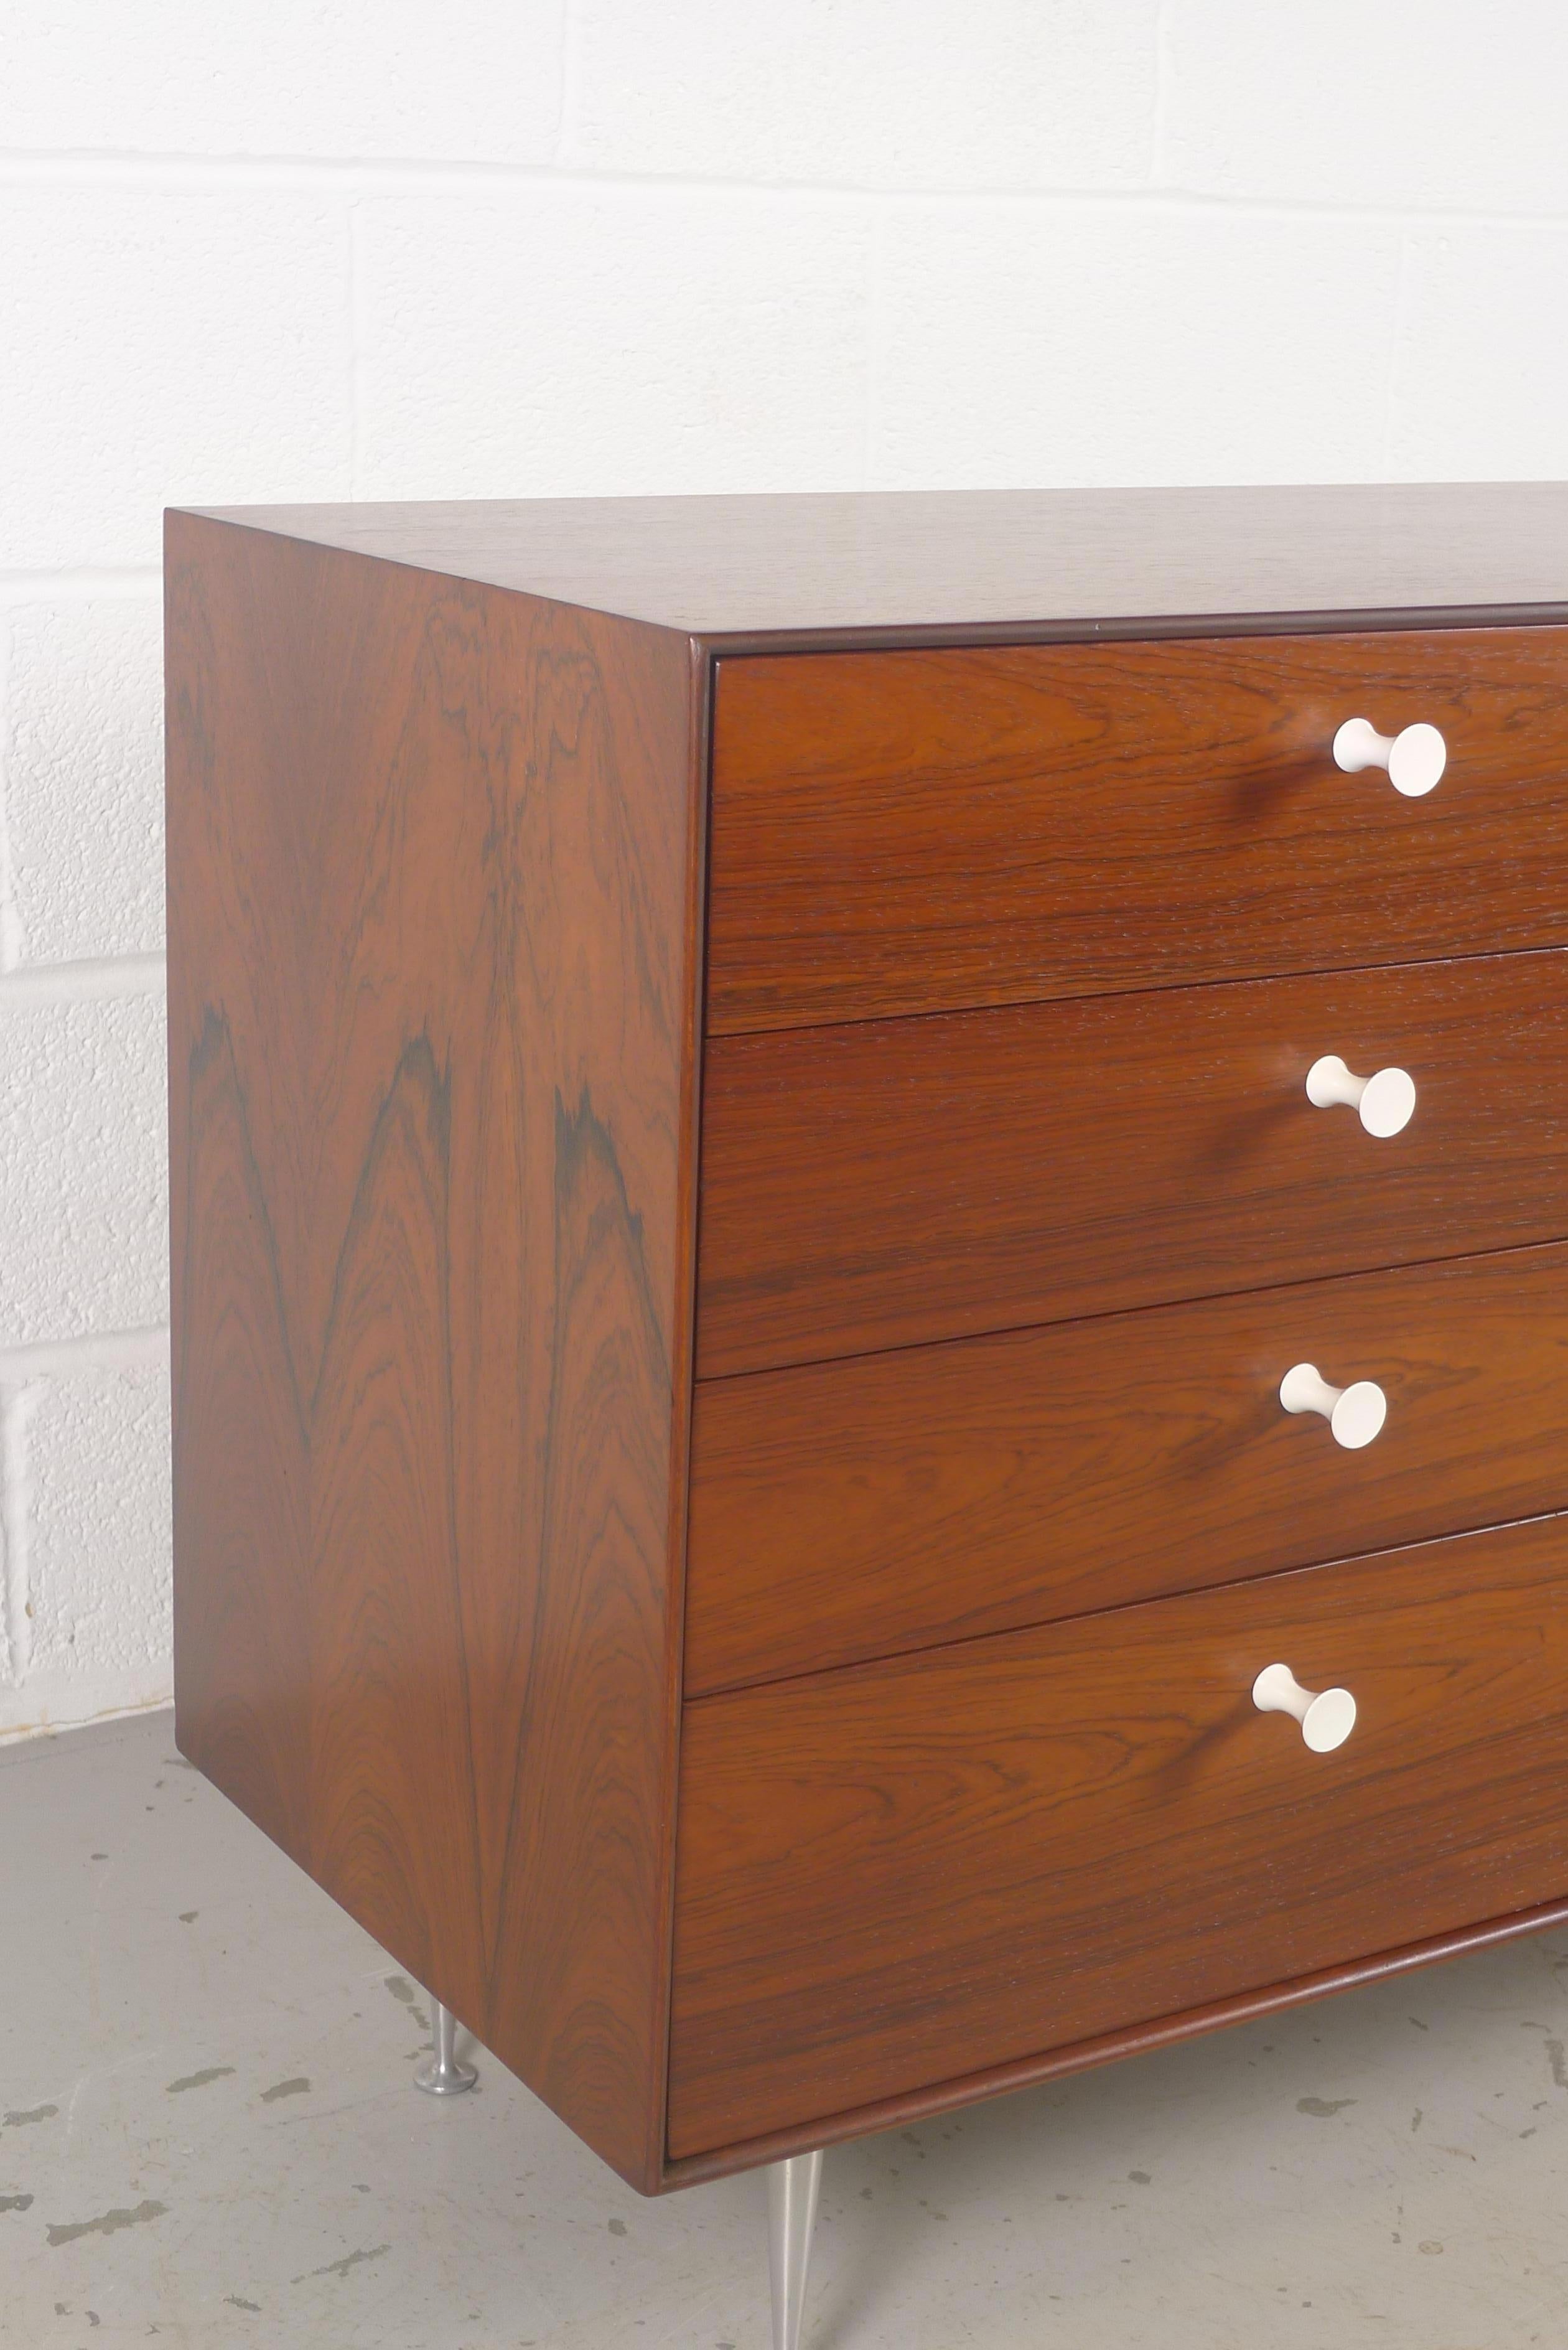 George Nelson for Herman Miller, USA, Thin Edge dresser model 5221 designed in 1952. This original example in bookmatched rosewood veneers produced in the 1950s 
8 drawers with original foil label top left. 
Excellent condition.
Provenance; From